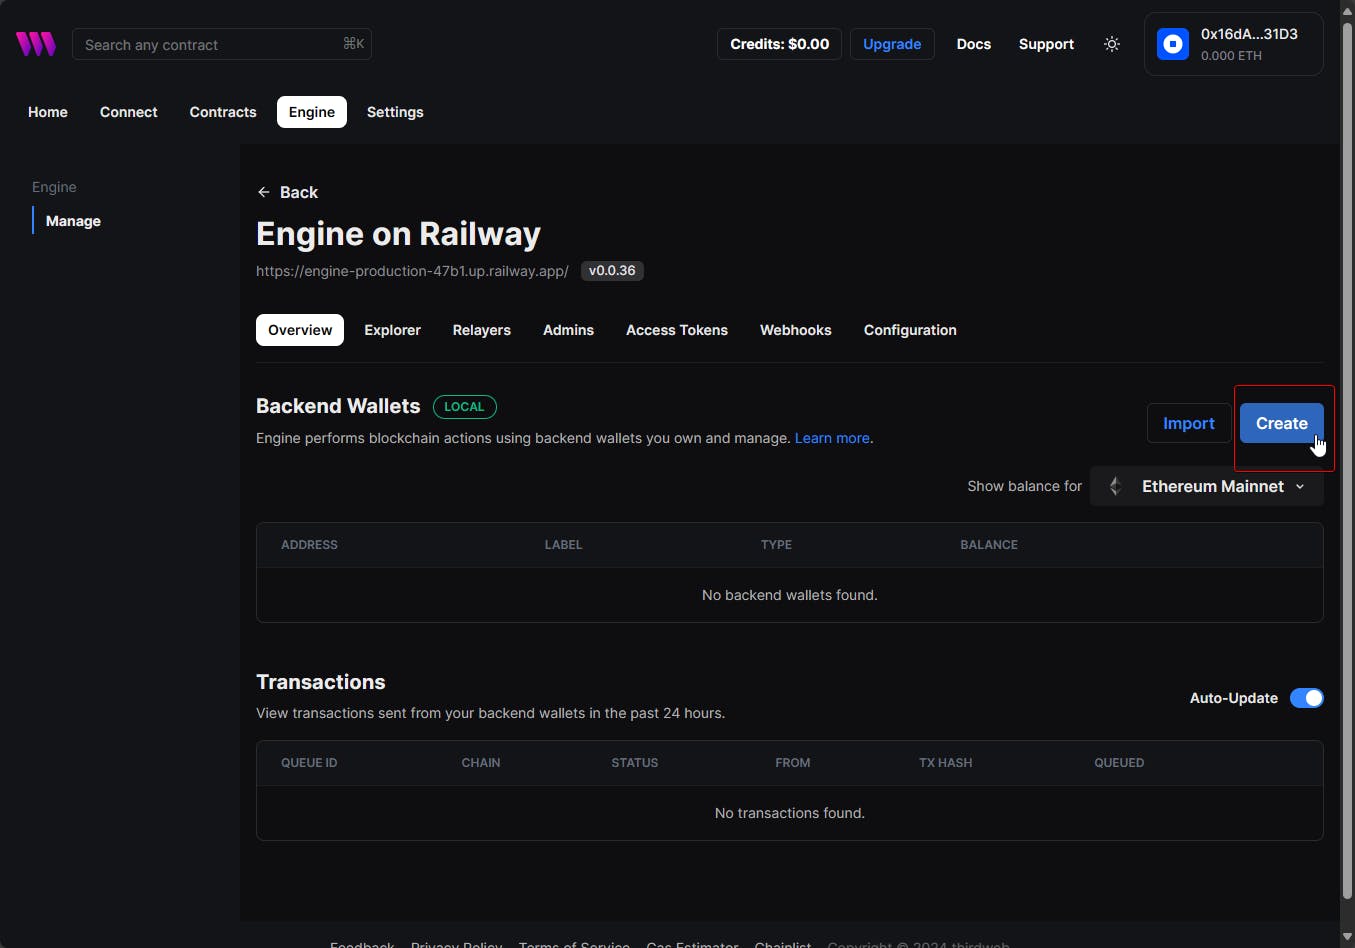 Screenshot of thirdweb user interface for "Engine on Railway" showing sections for backend wallets and transactions with no data found, and tabs for Overview, Explorer, Relayers, Admins, Access Tokens, Webhooks, and Configuration.